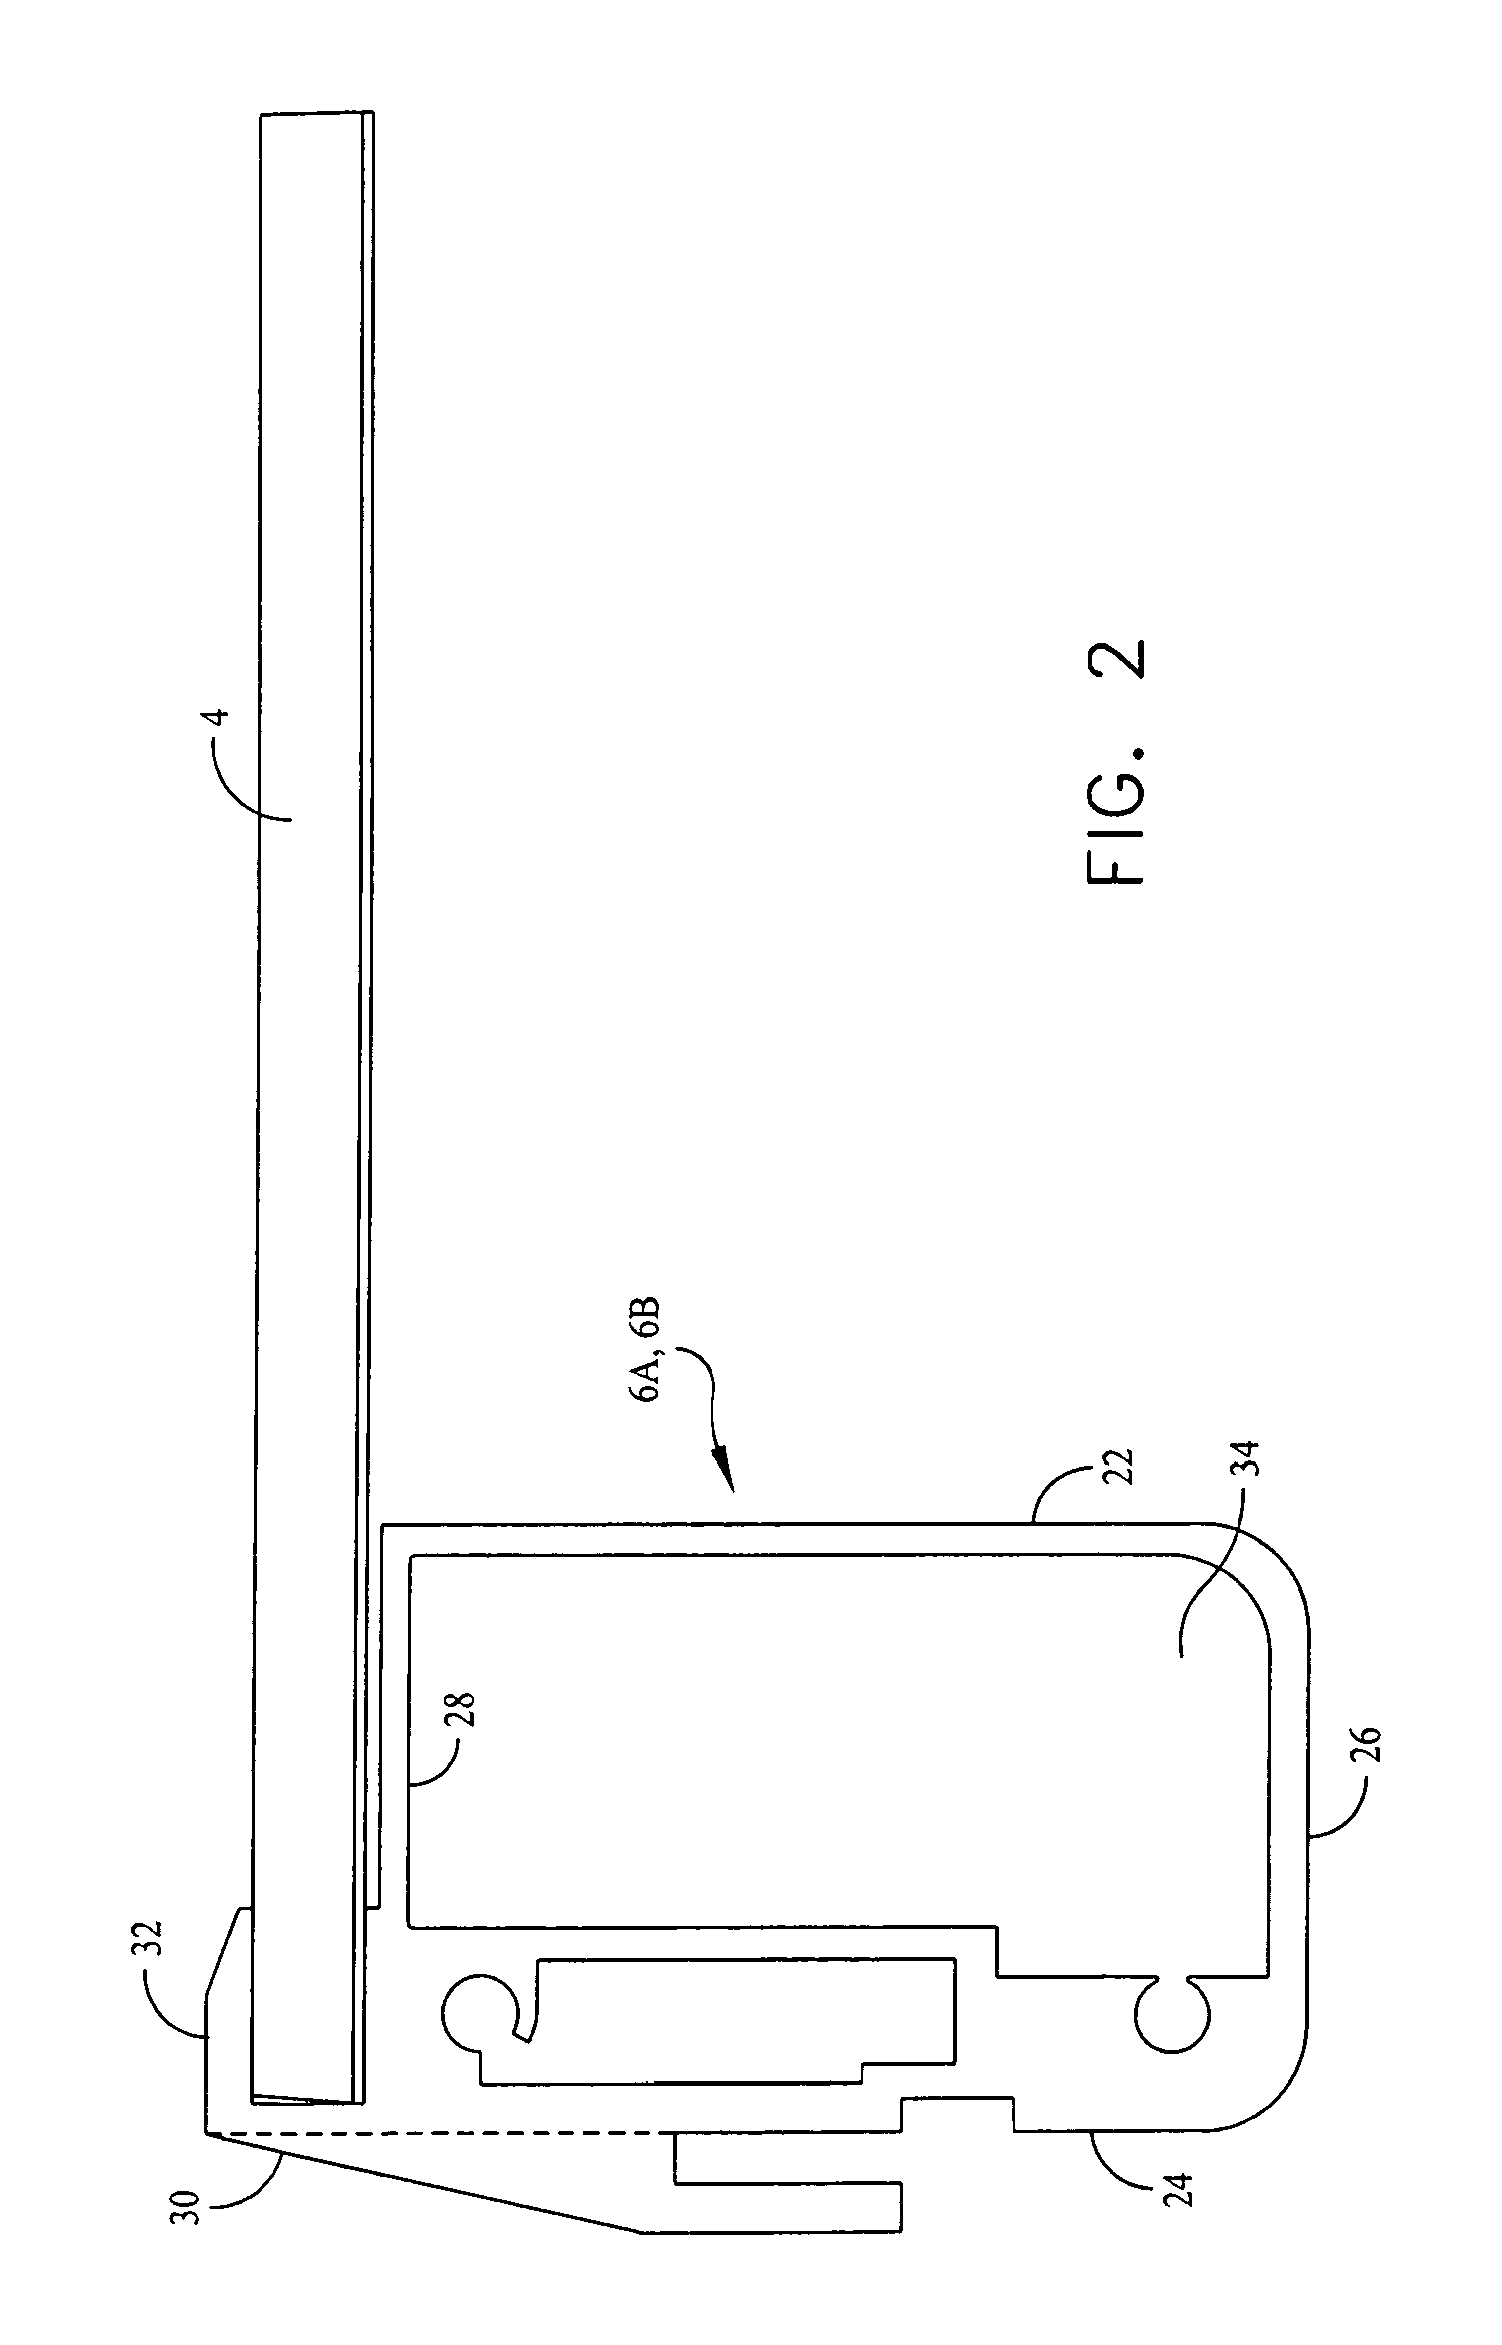 Data acquisition apparatus and methodology for self-diagnosing of AC modules